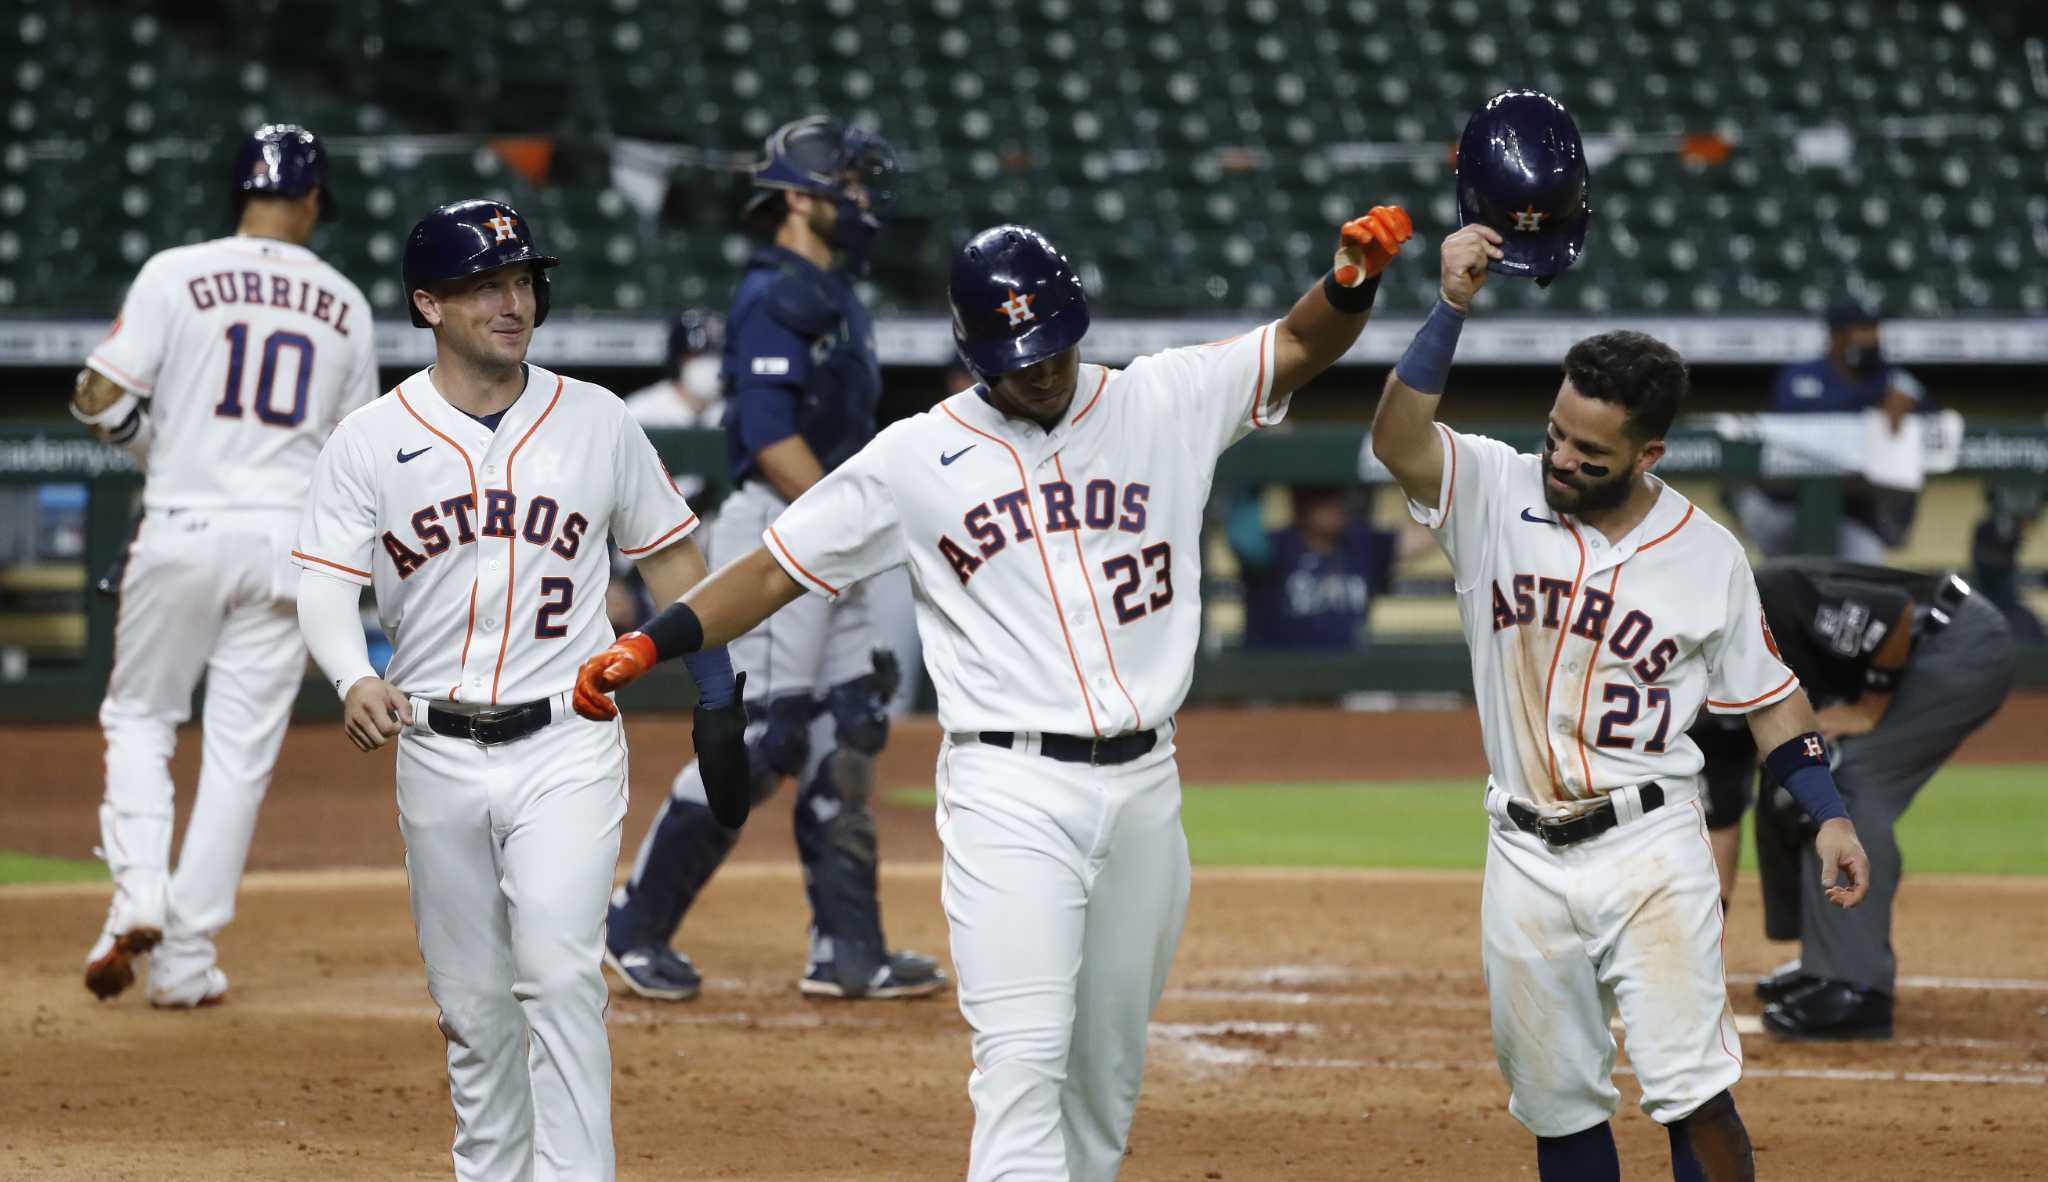 astros wearing blm shirts